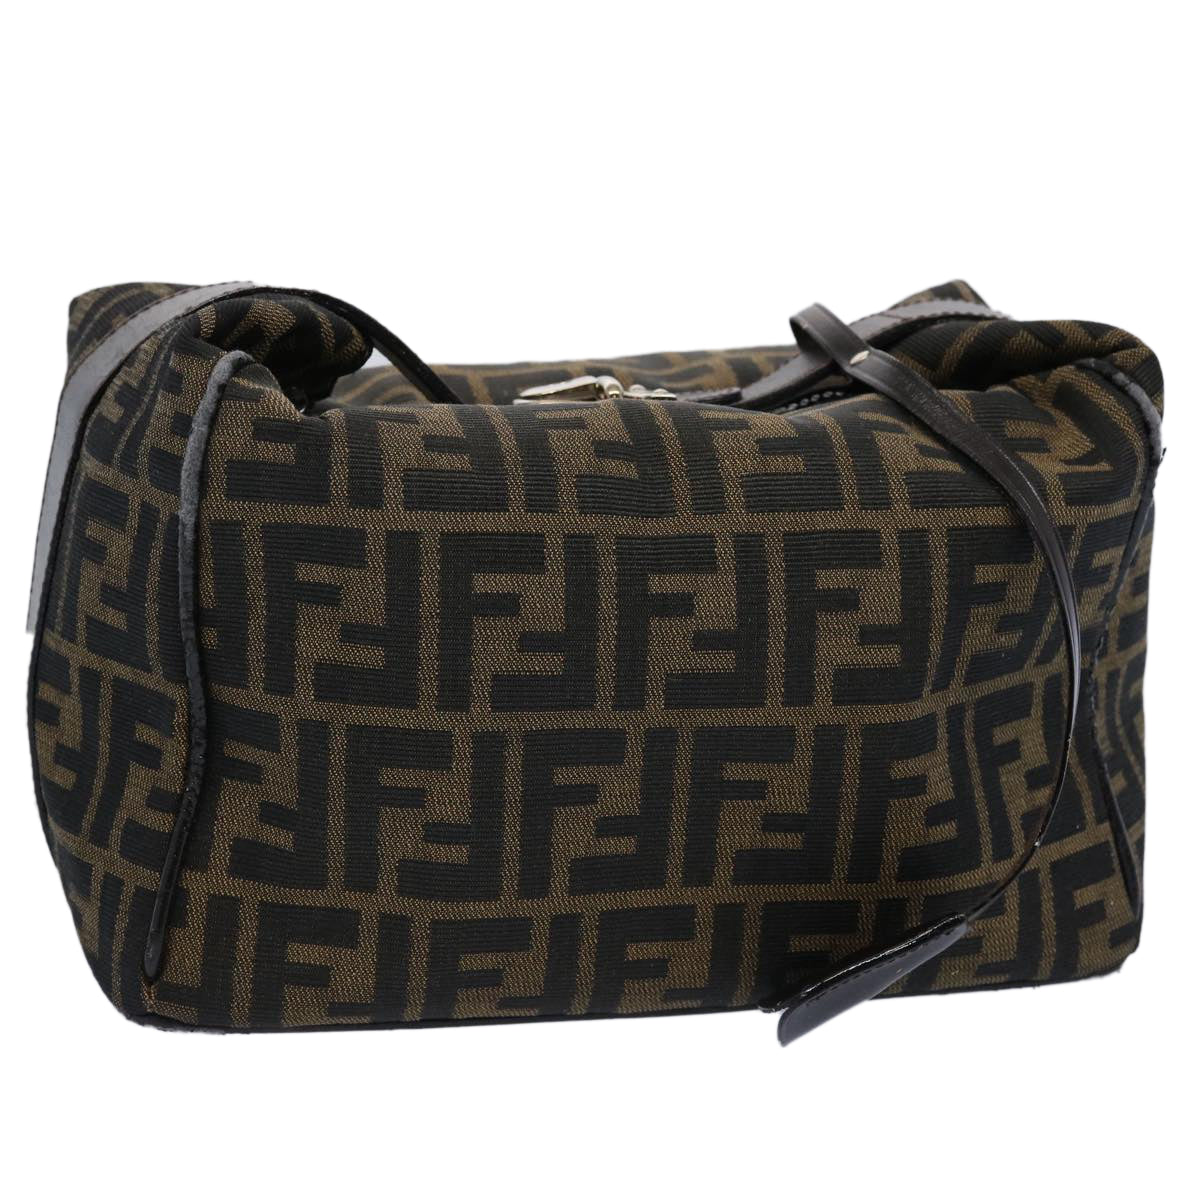 FENDI Zucca Canvas Vanity Cosmetic Pouch Black Brown Auth 61577